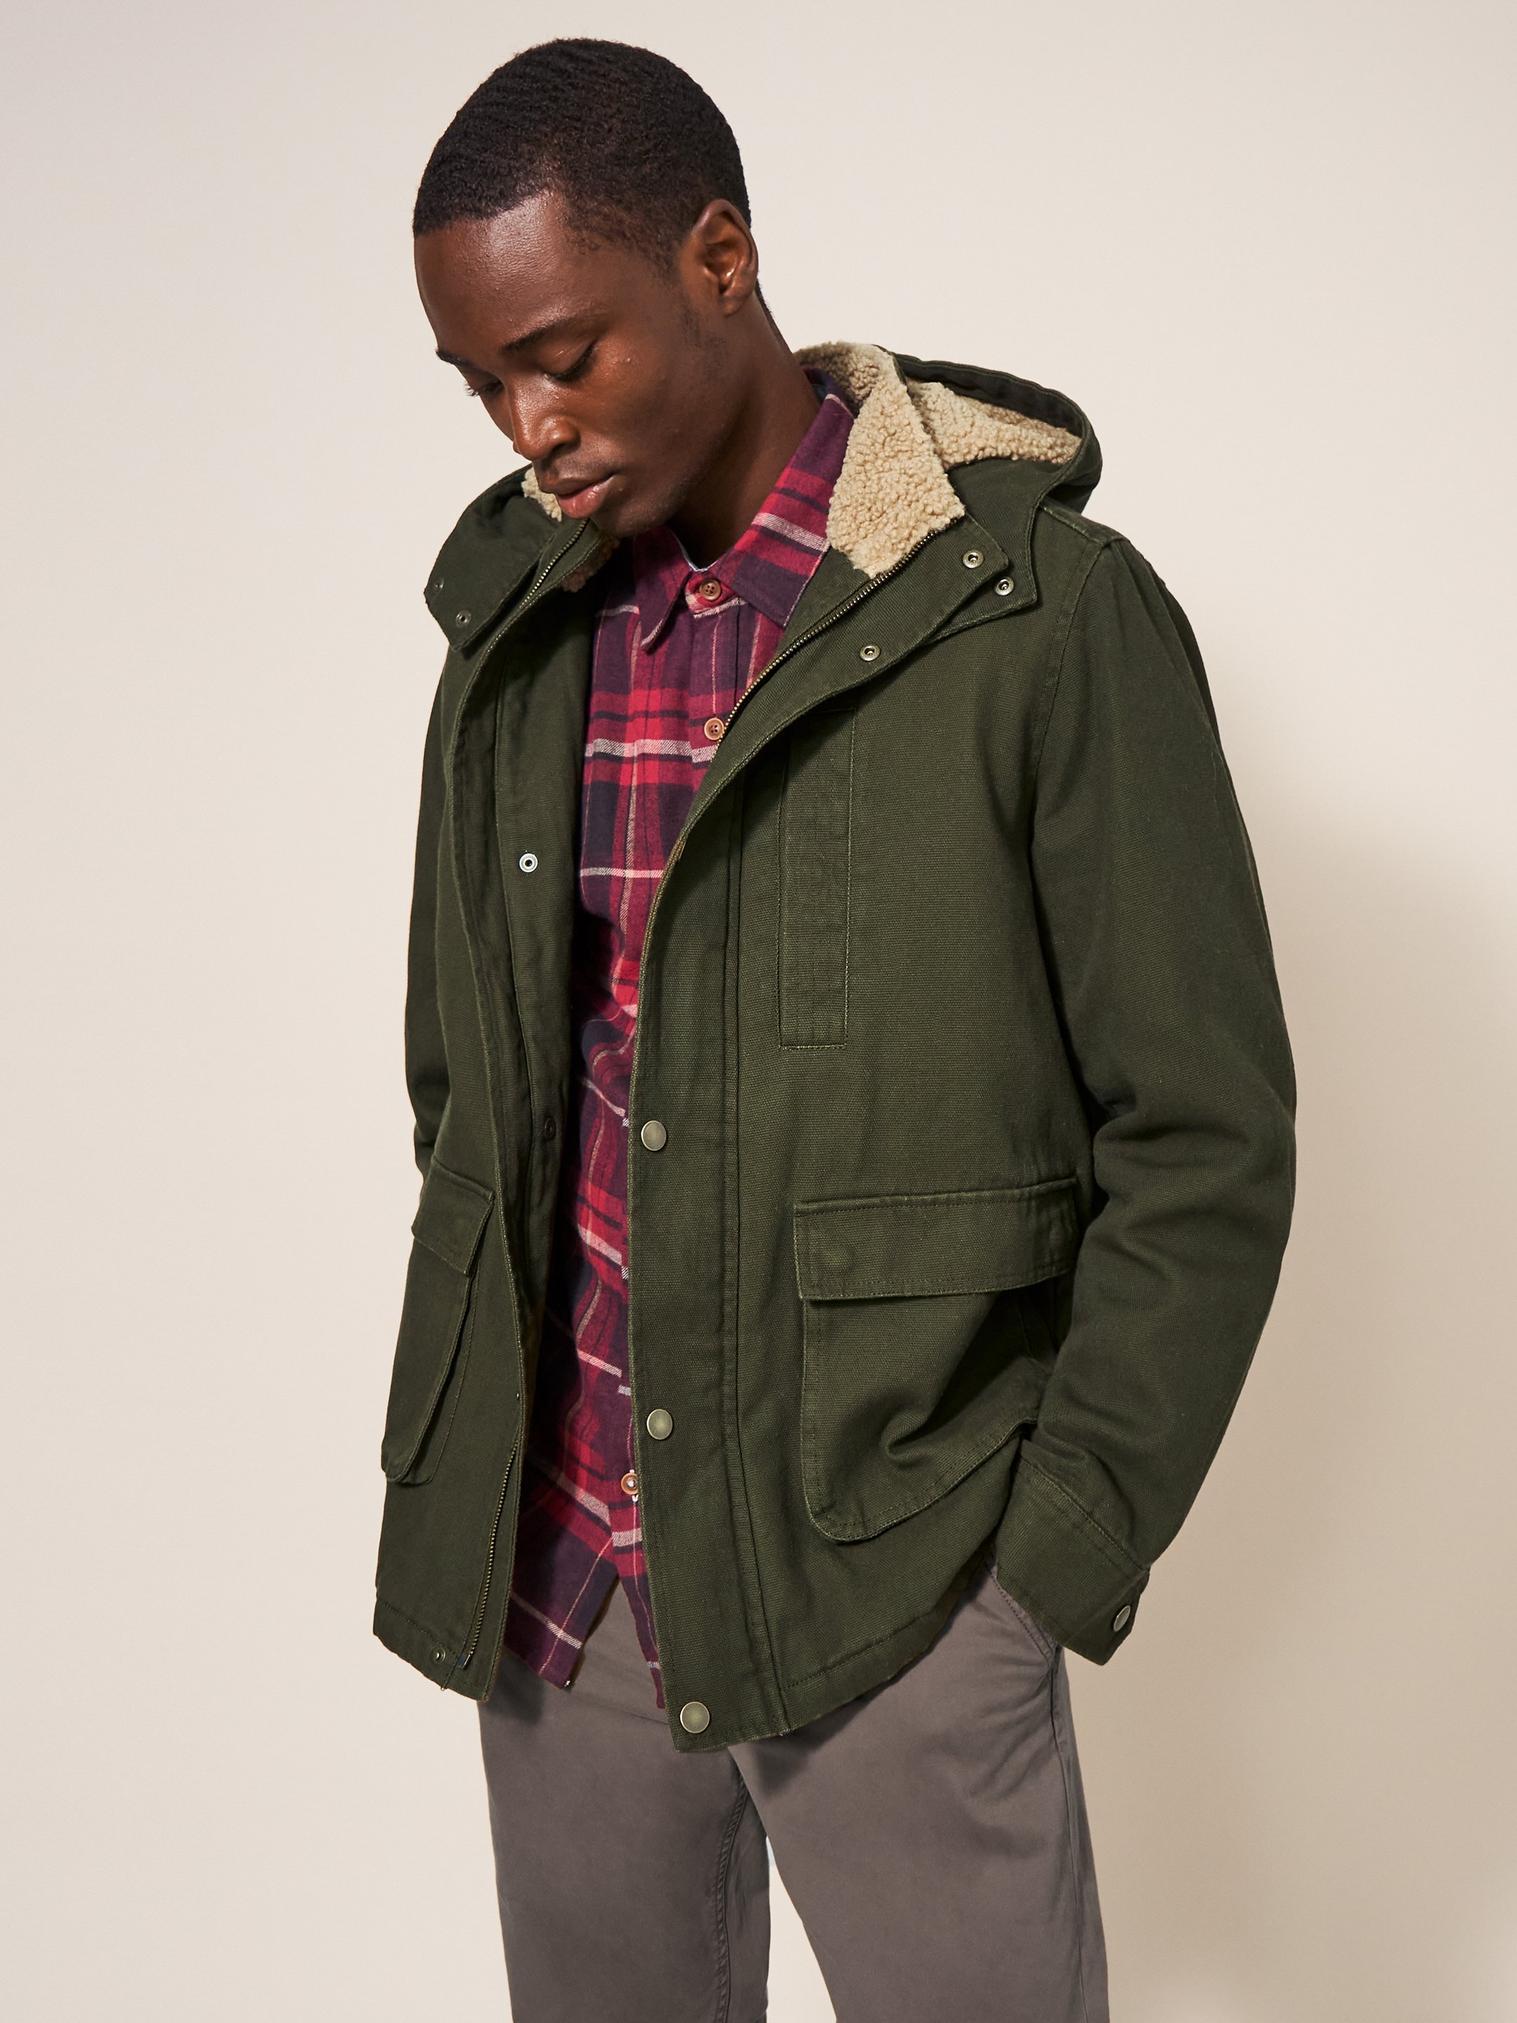 Borg Lined Winter Jacket in KHAKI GRN - LIFESTYLE